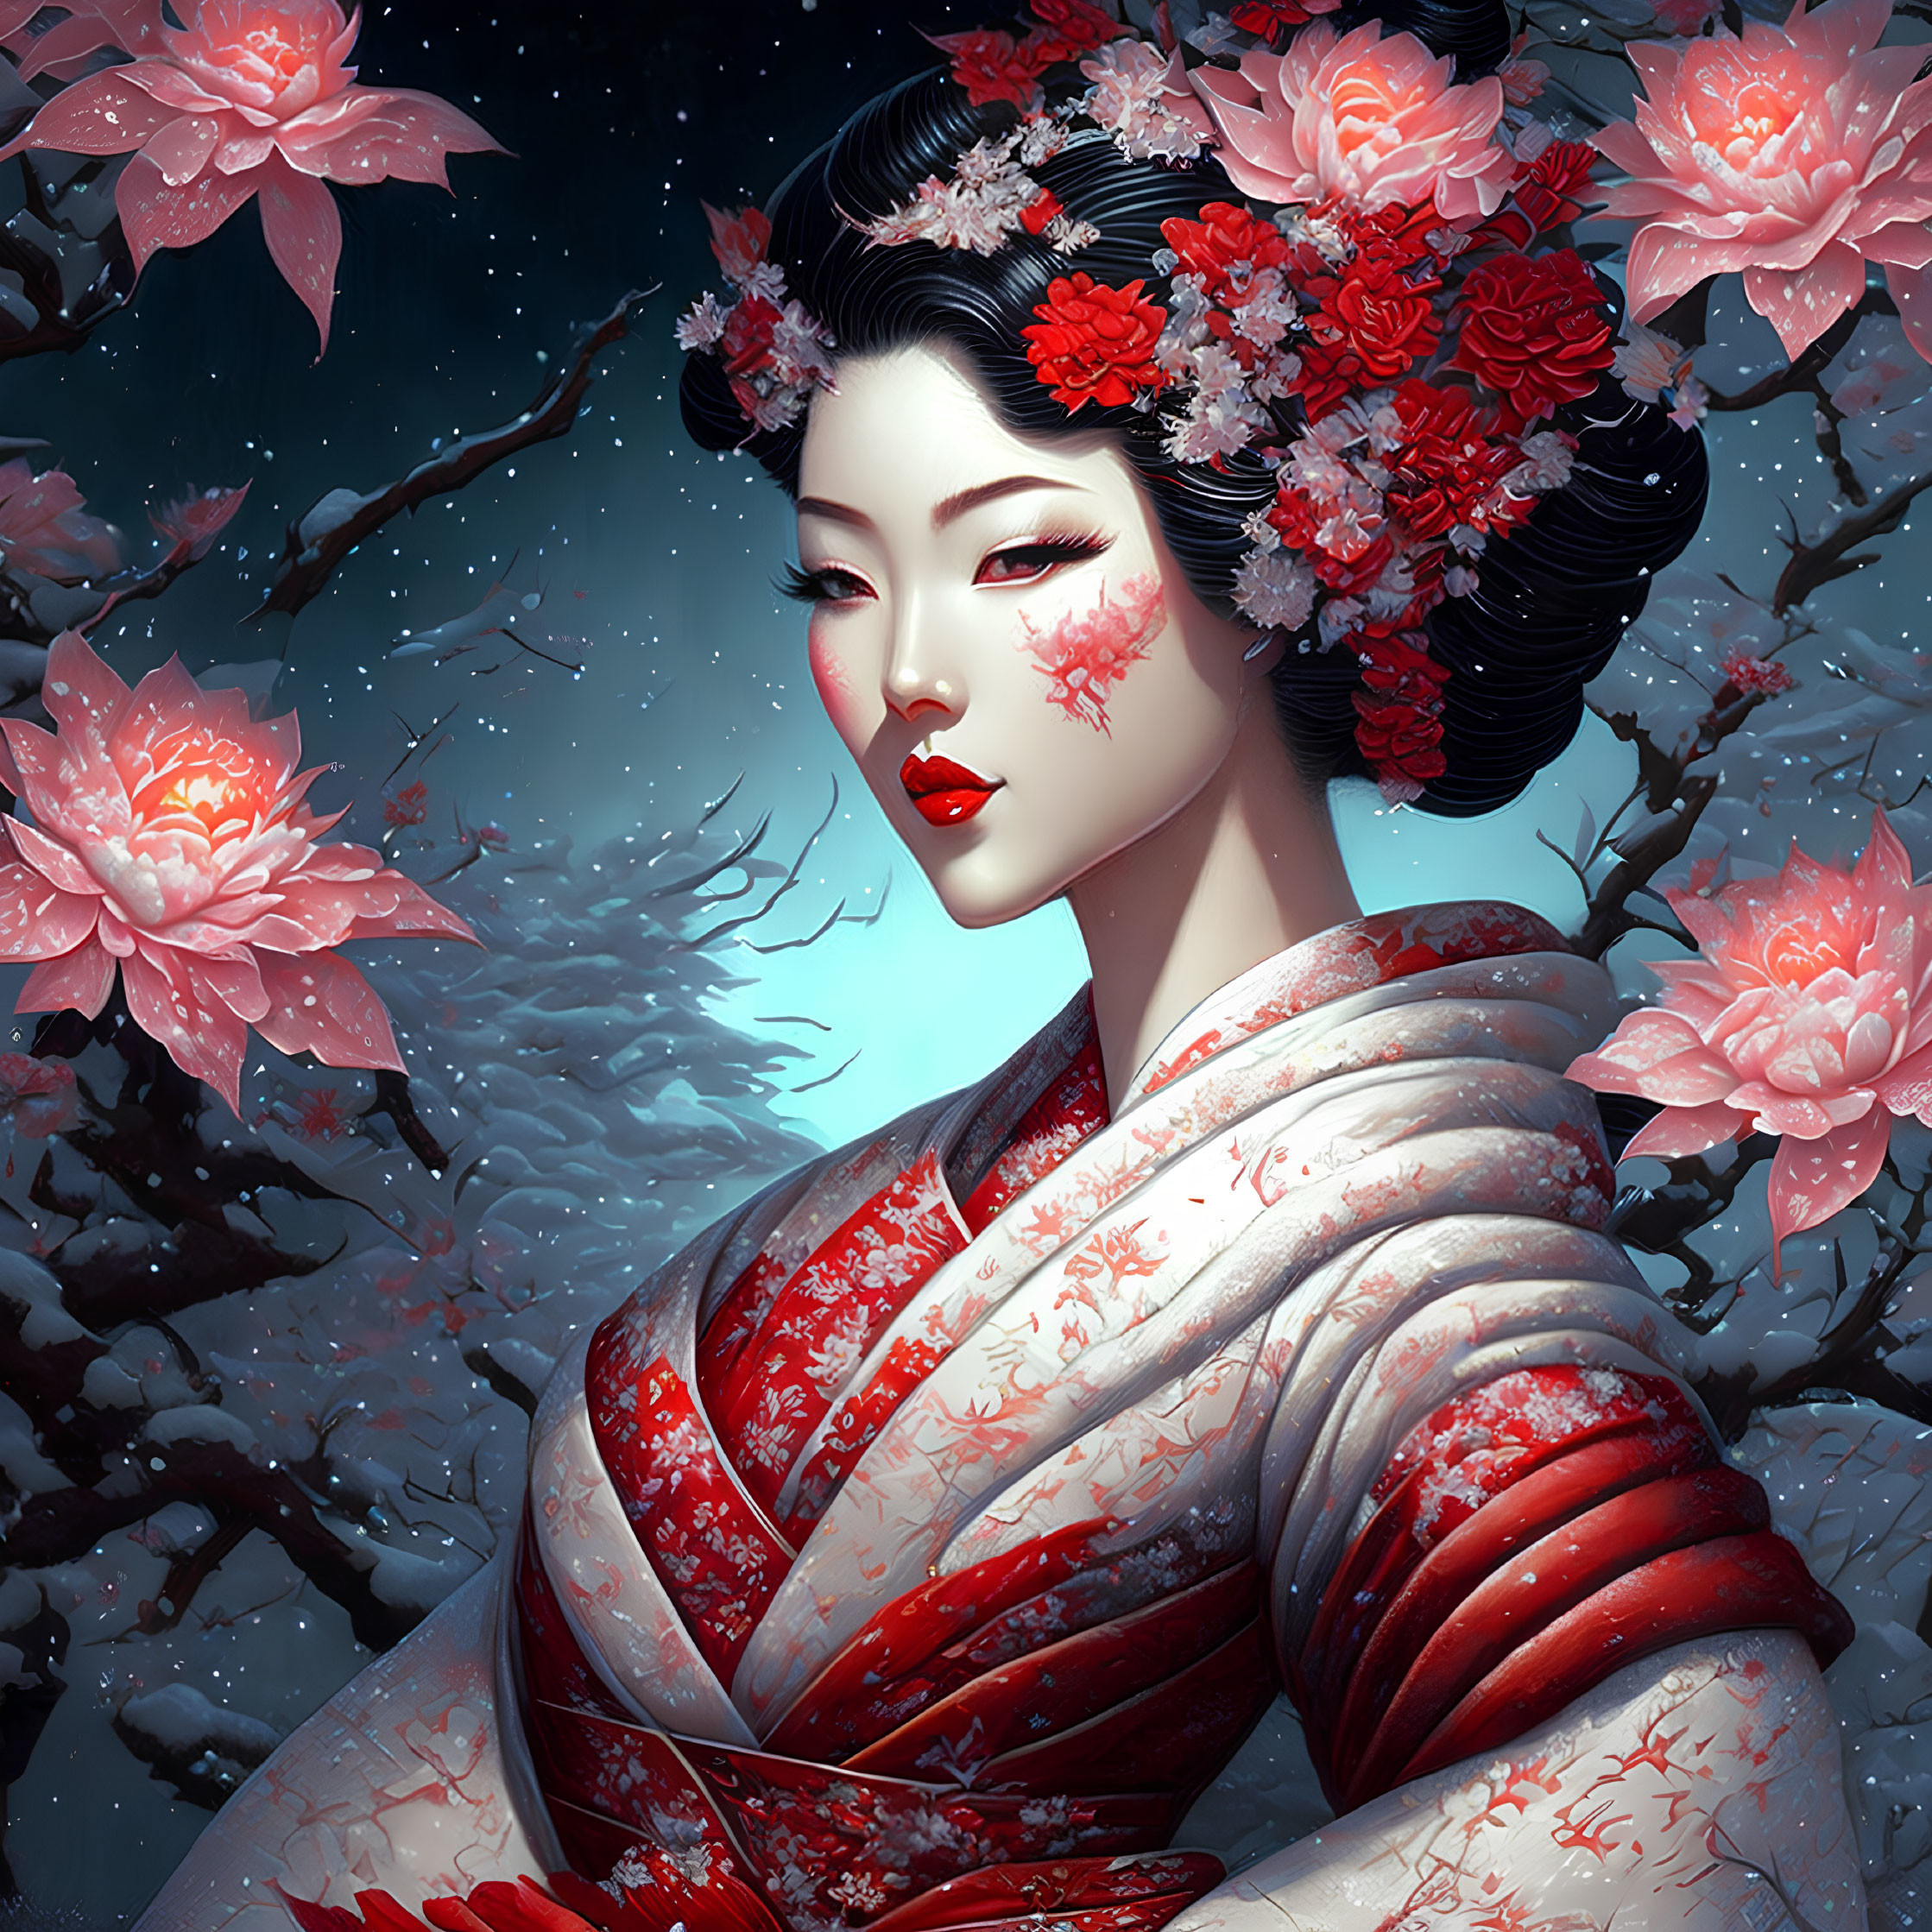 Digital artwork: Woman in Japanese attire with floral decorations, cherry blossoms backdrop.